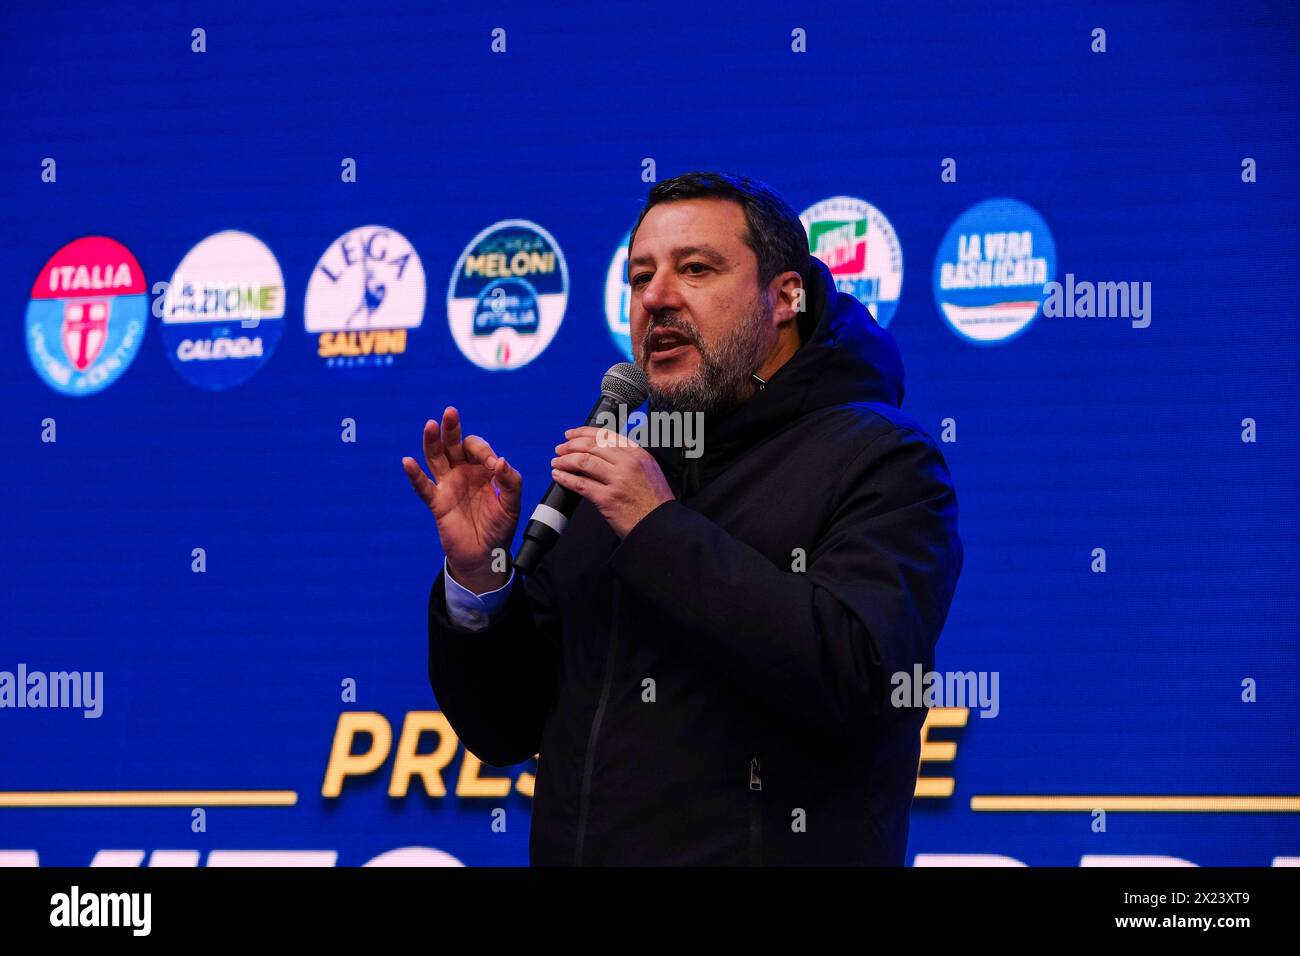 United centre-right rally regional basilicata Minister of Infrastructure and Transport and leader of the Lega Matteo Salvini During the concluding rally of the centre-right candidate for the Basilicata regional . ABP09089 Copyright: xAntonioxBalascox Stock Photo